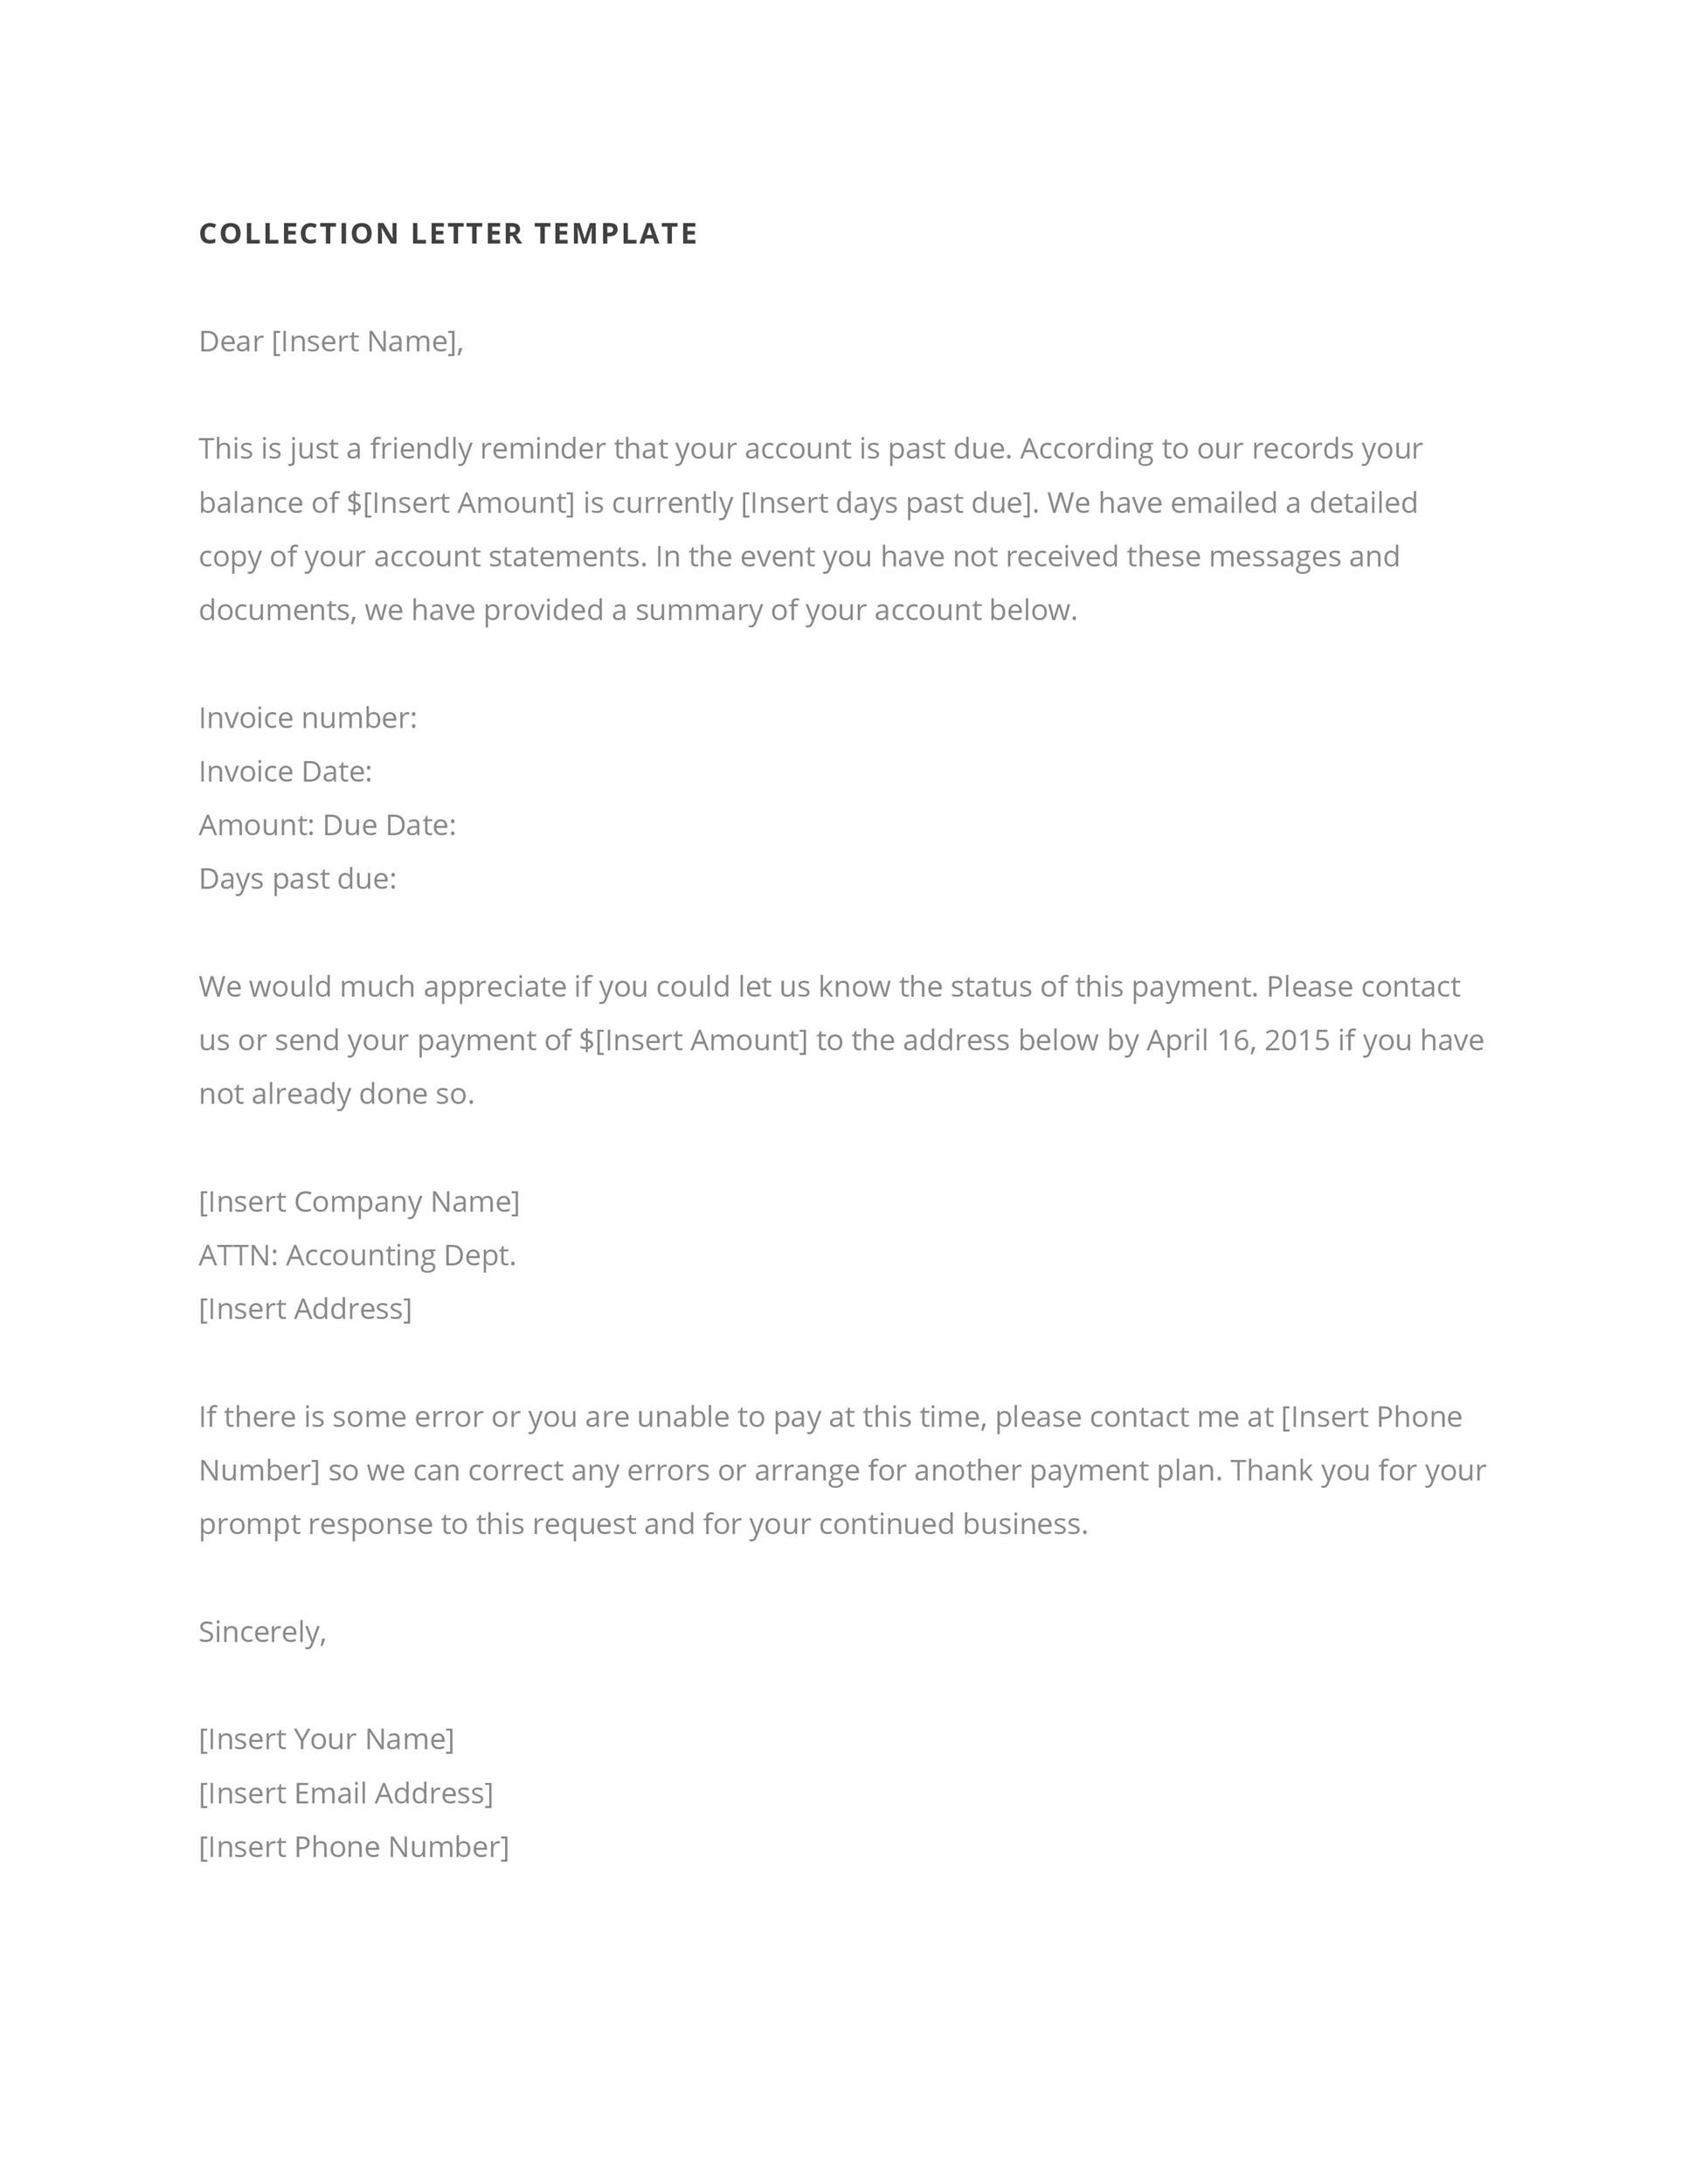 Free collection letter template 01